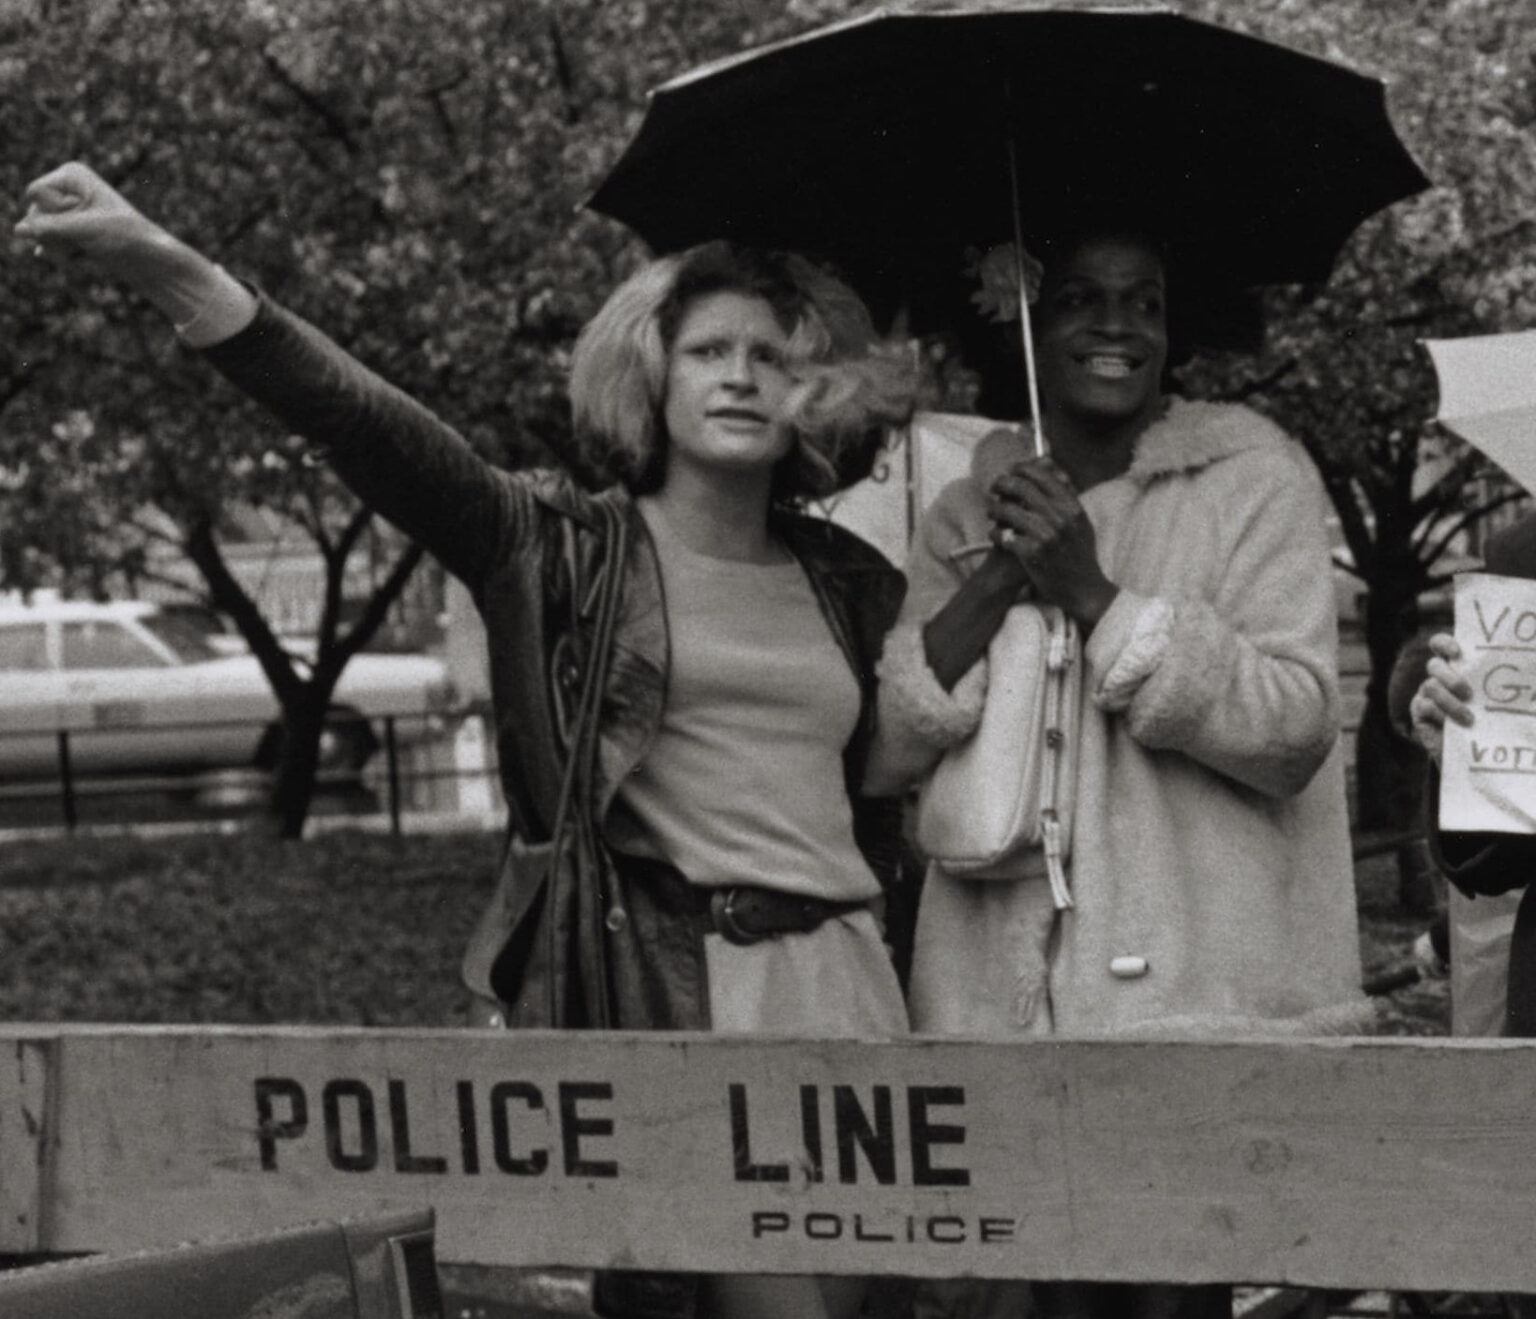 Marsha P. Johnson’s participation at Stonewall was just the start of her activism, which continued to grow until her untimely death in 1992.